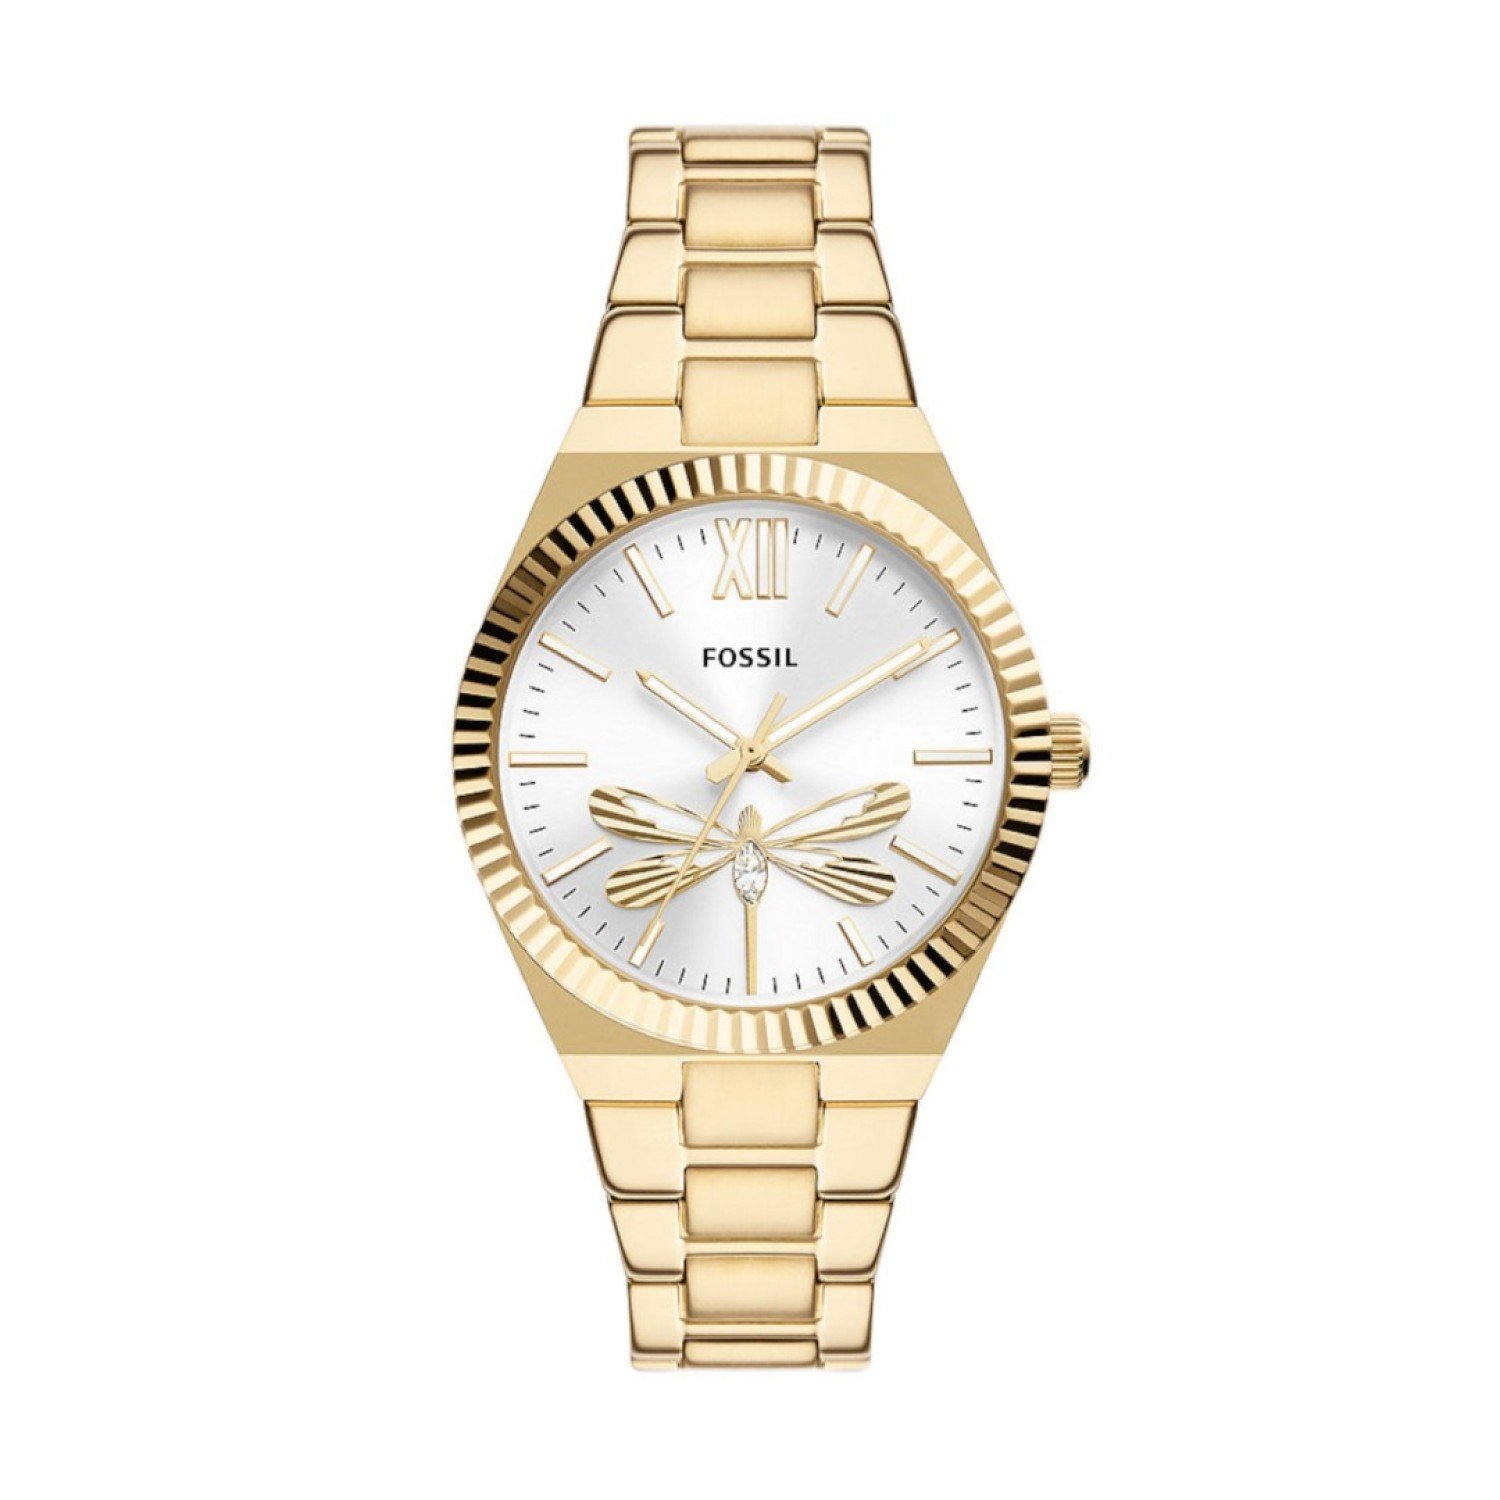 ES5262 Fossil Scarlette Three-Hand Gold-Tone Stainless Steel Watch. Afterpay - Split your purchase into 4 instalments - Pay for your purchase over 4 instalments, due every two weeks.